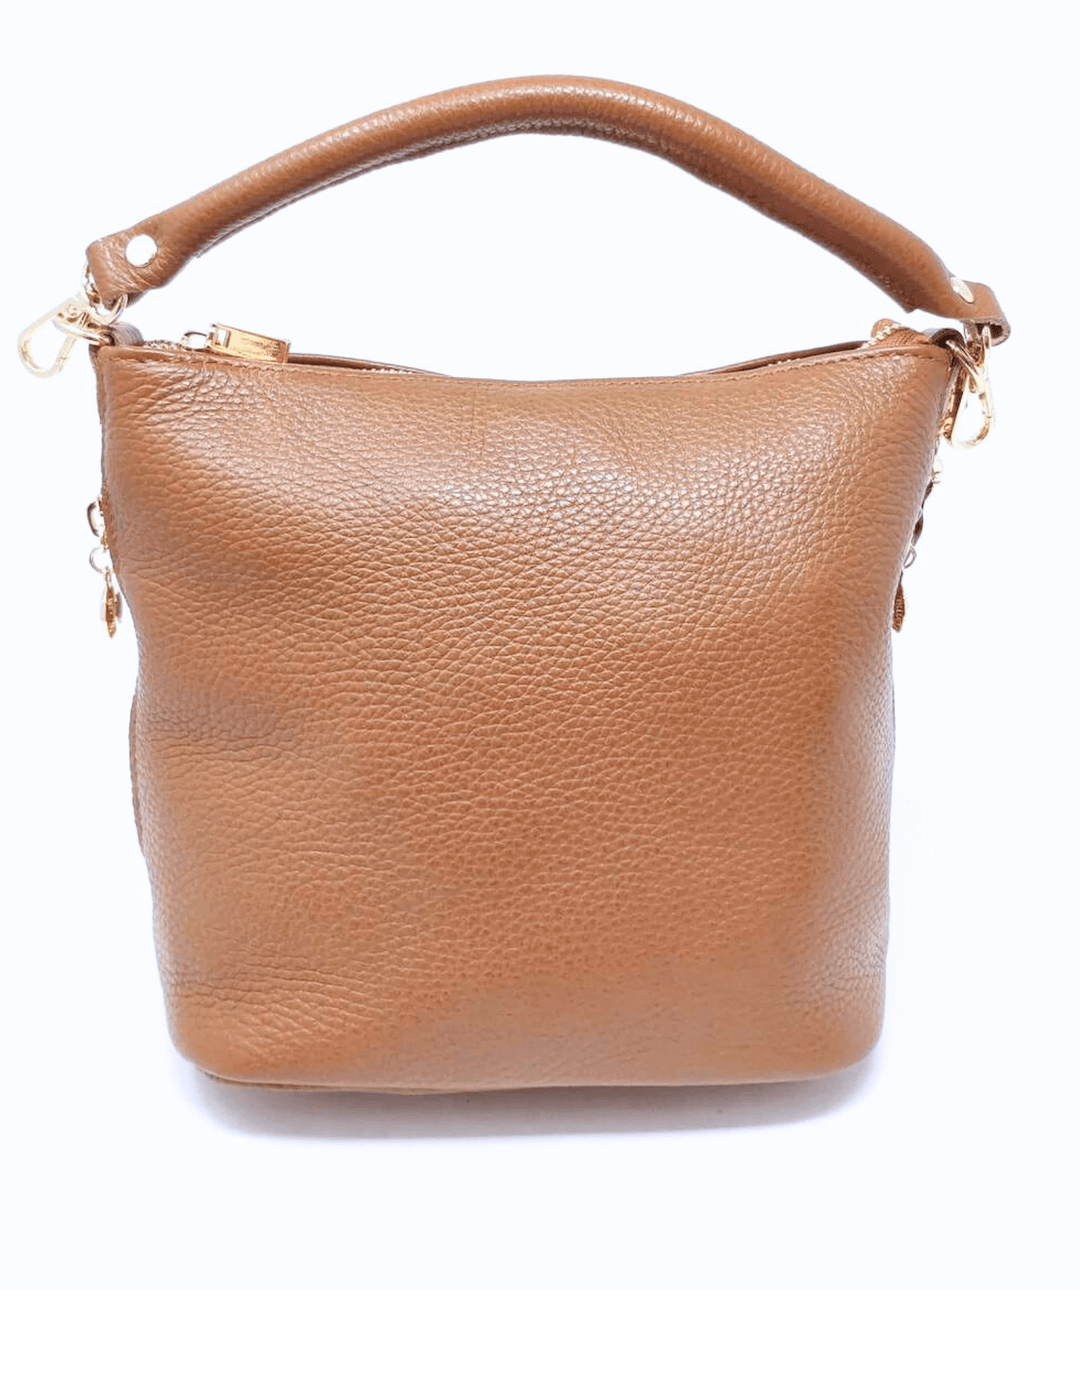 leather bucket bag with crossbody strap tres chic boutique womens gift idea camel